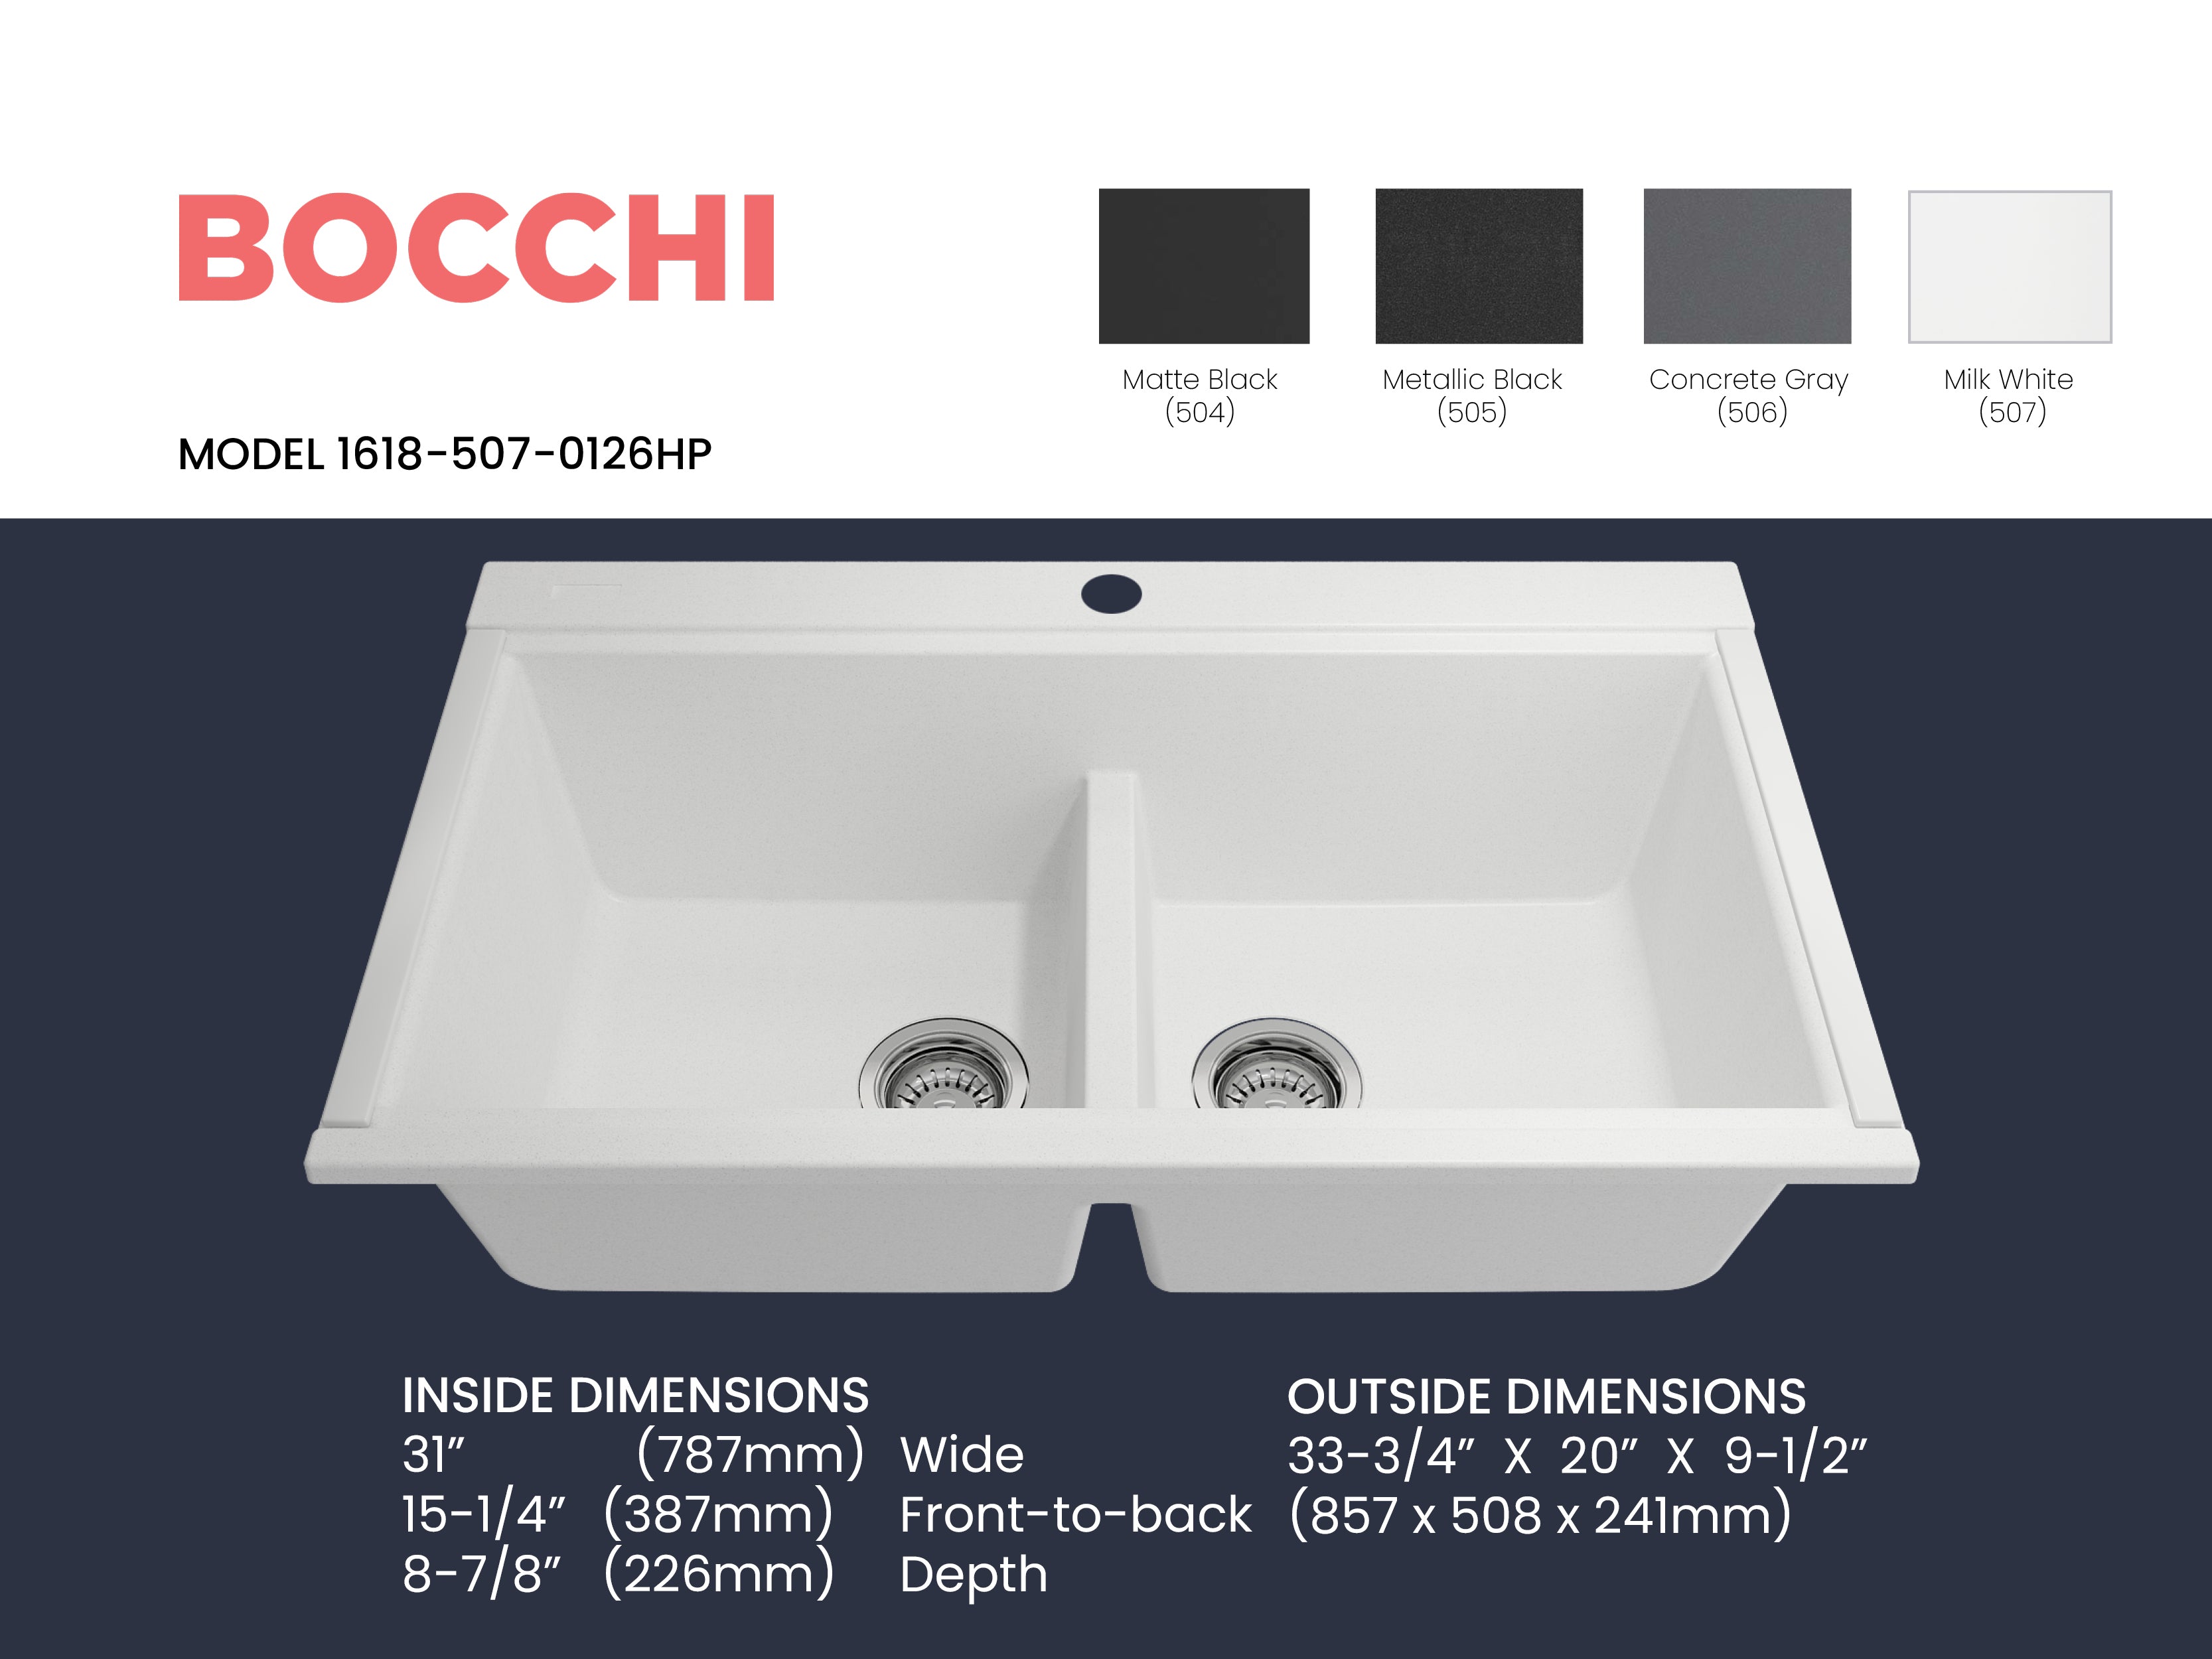 Bocchi 34" Undermount Double Bowl Composite Workstation Kitchen Sink with Covers in Milk White